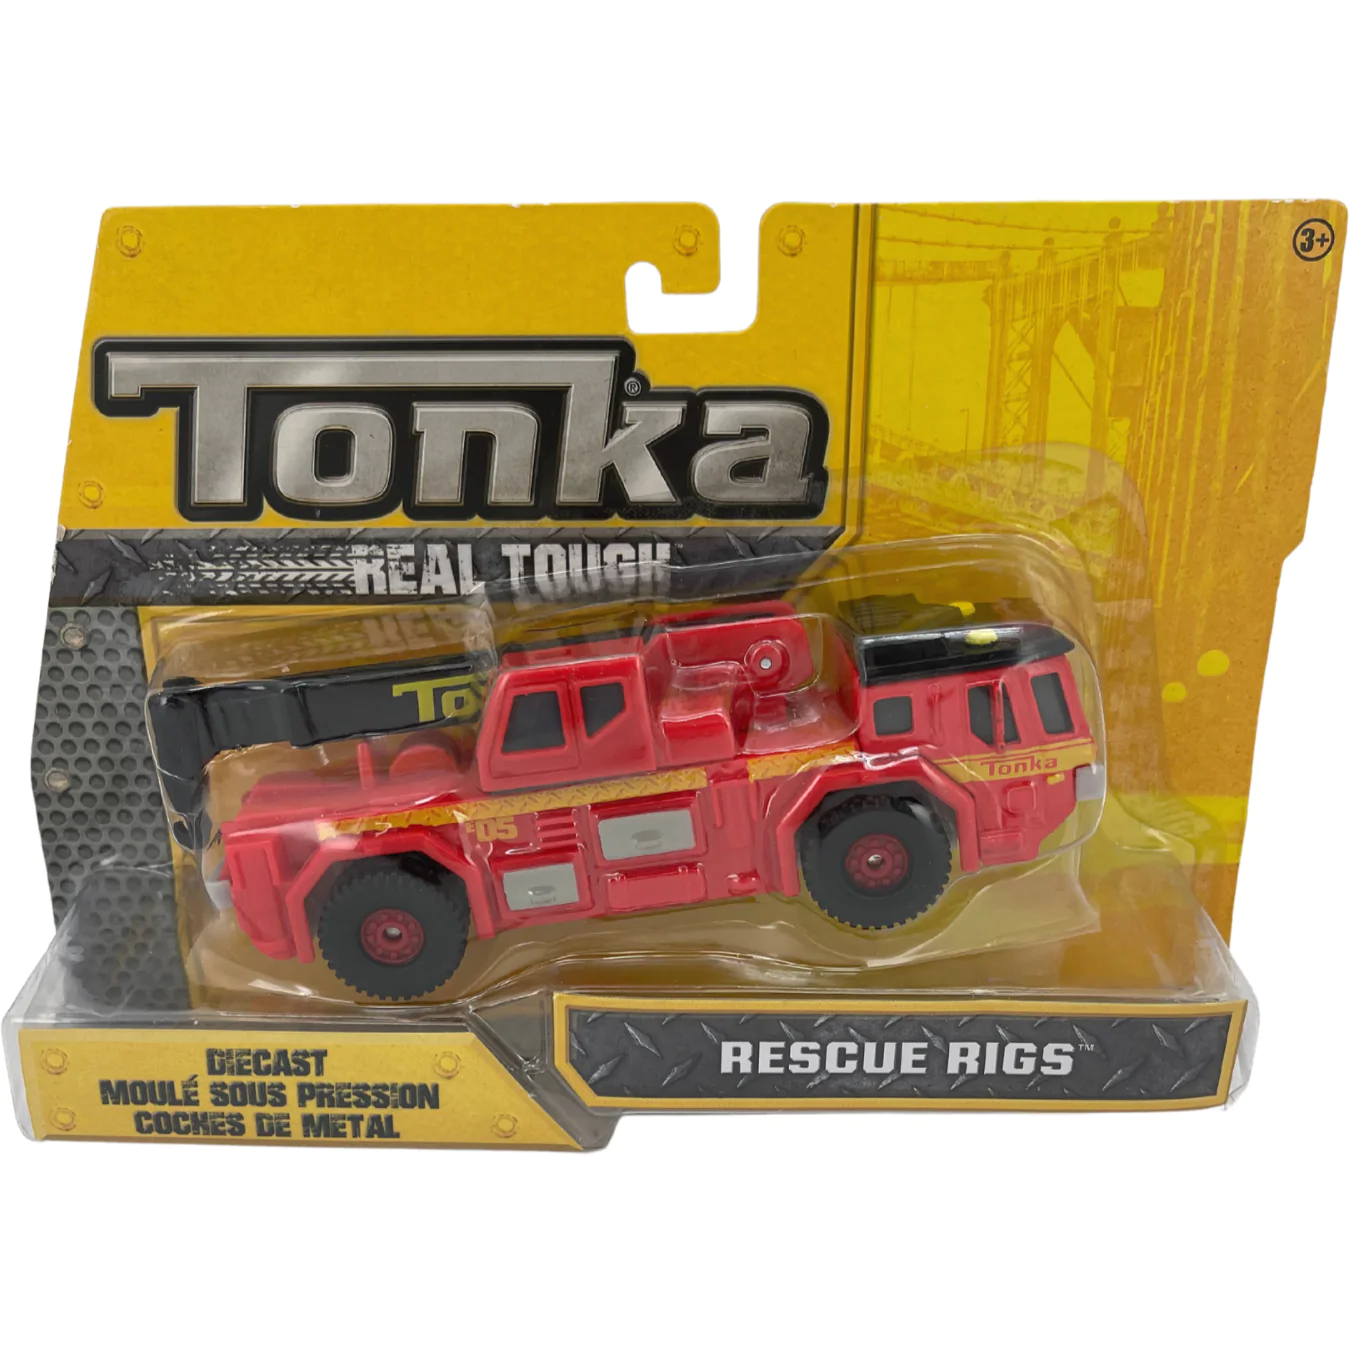 Tonka Real Tough Rescue Rigs / Die Cast Crane / Red